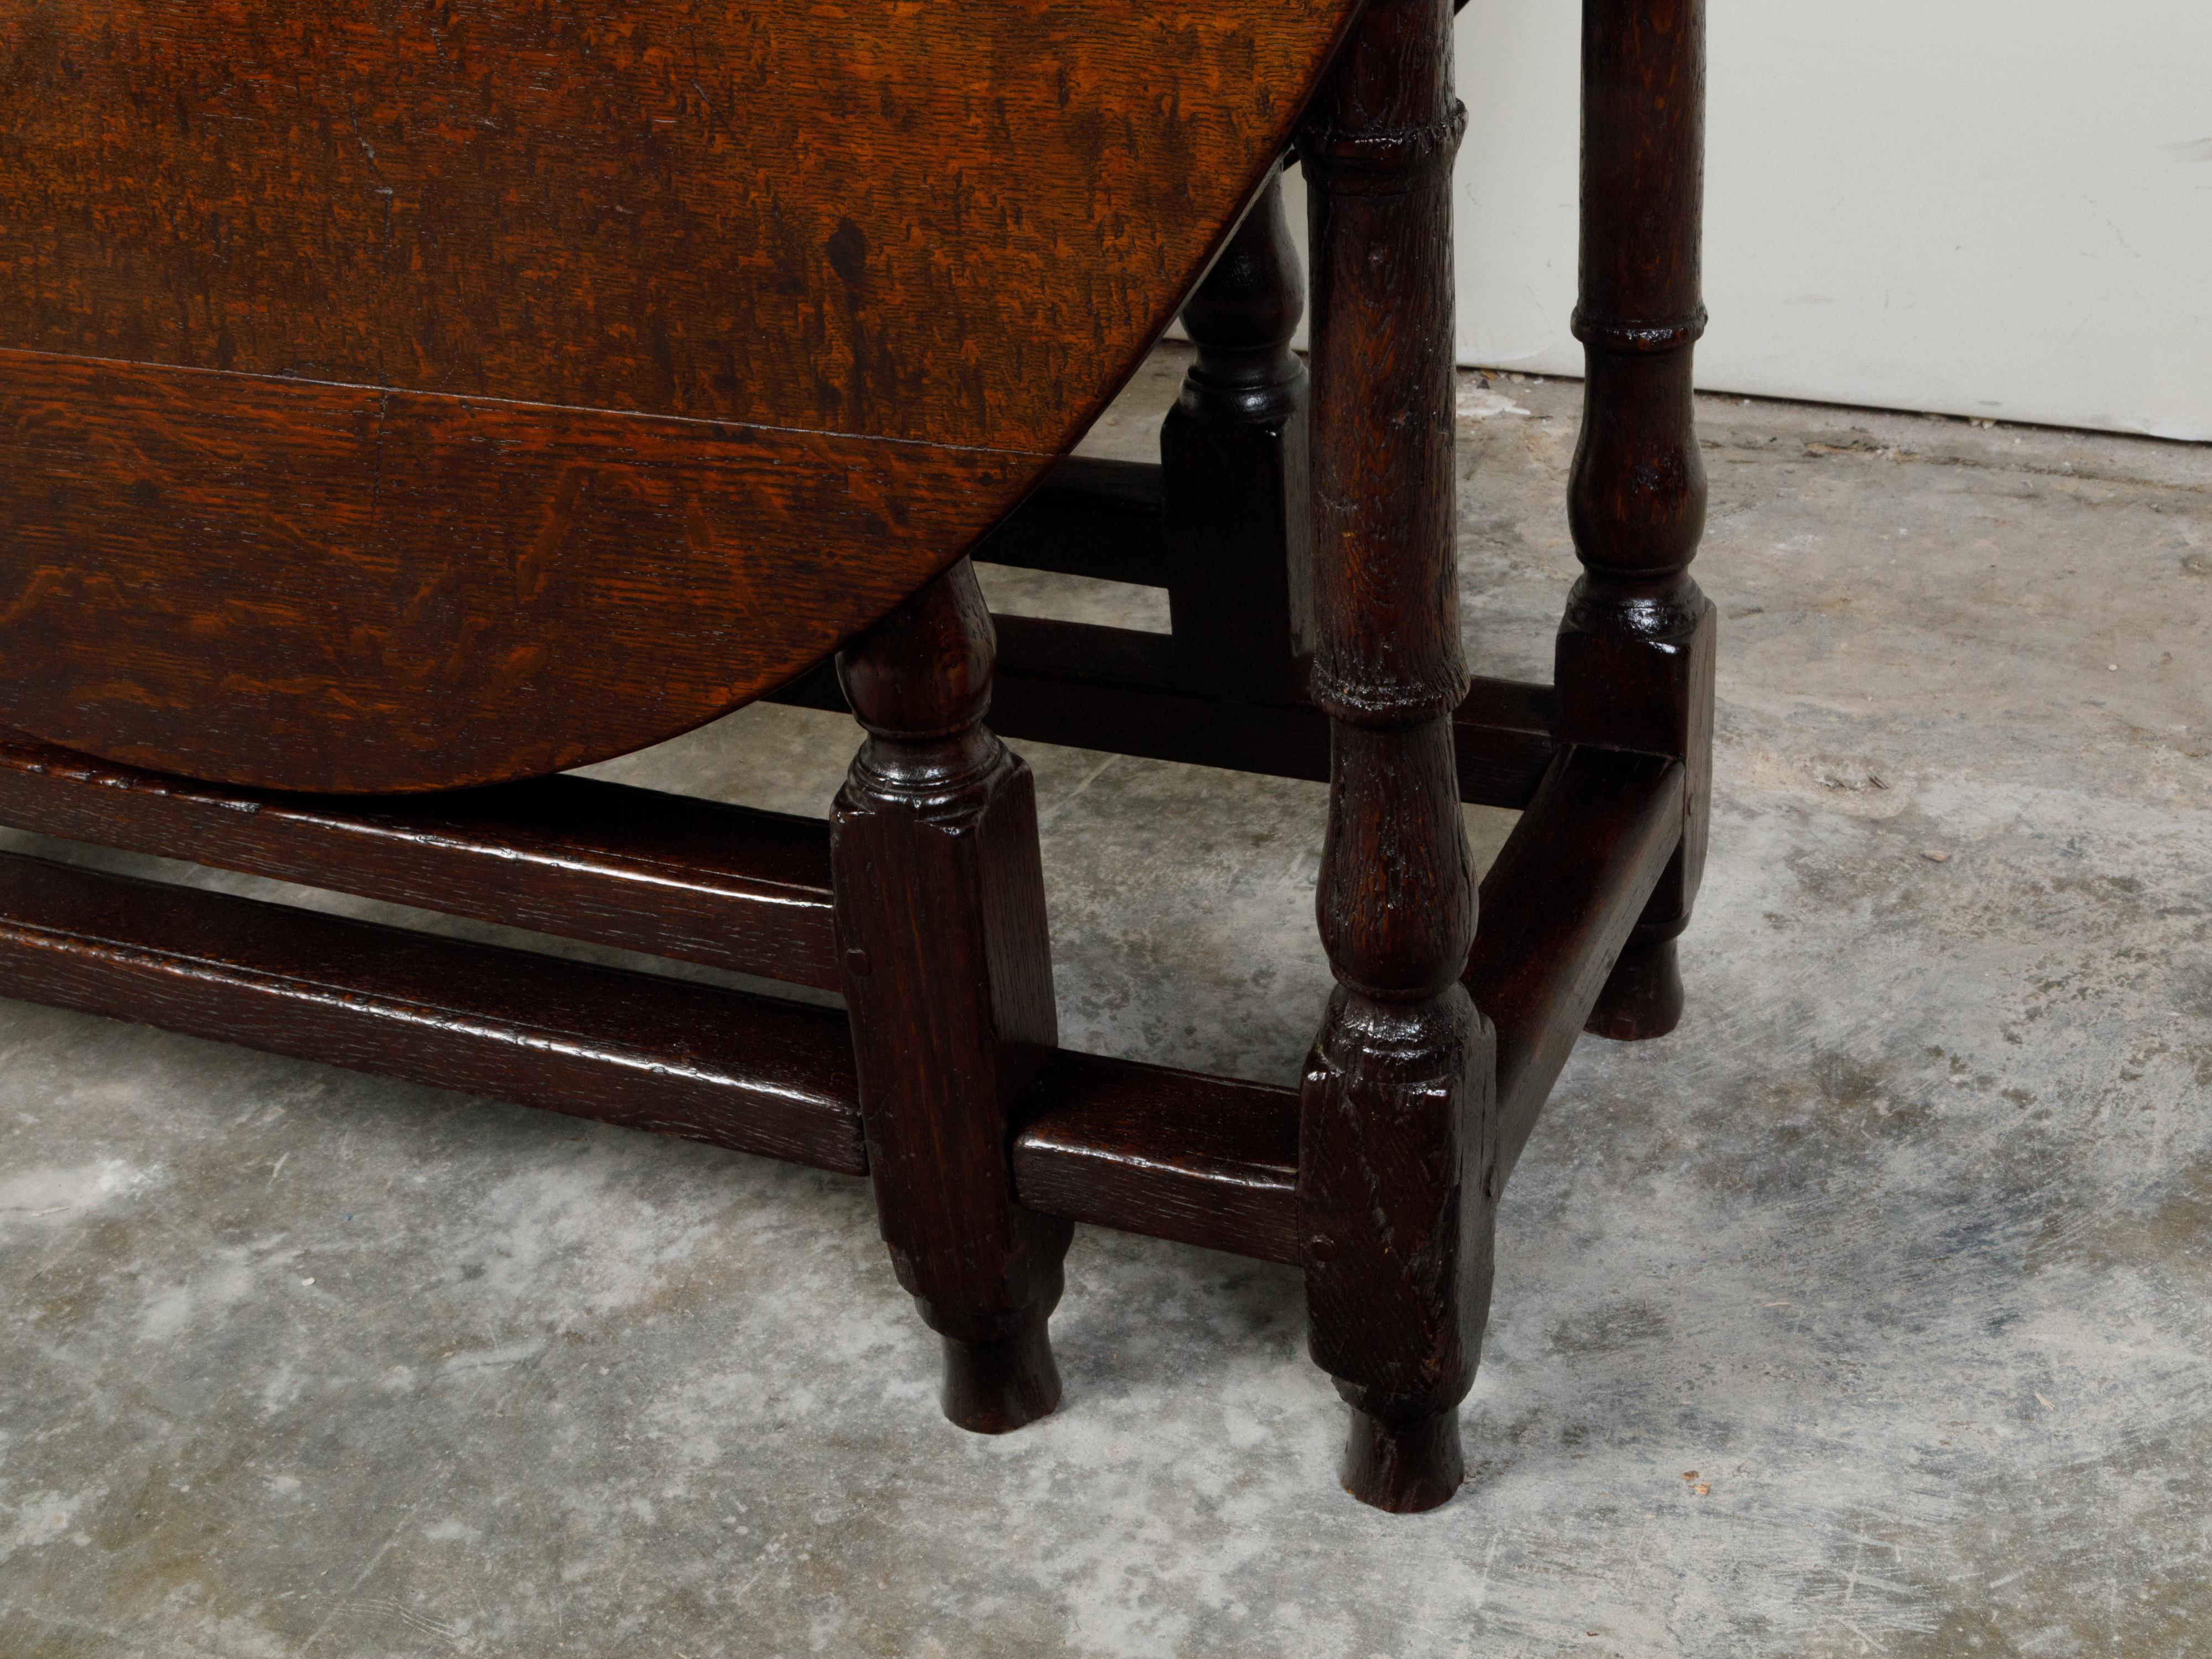 English 18th Century Oval Top Drop-Leaf Gateleg Table with Turned Legs For Sale 3